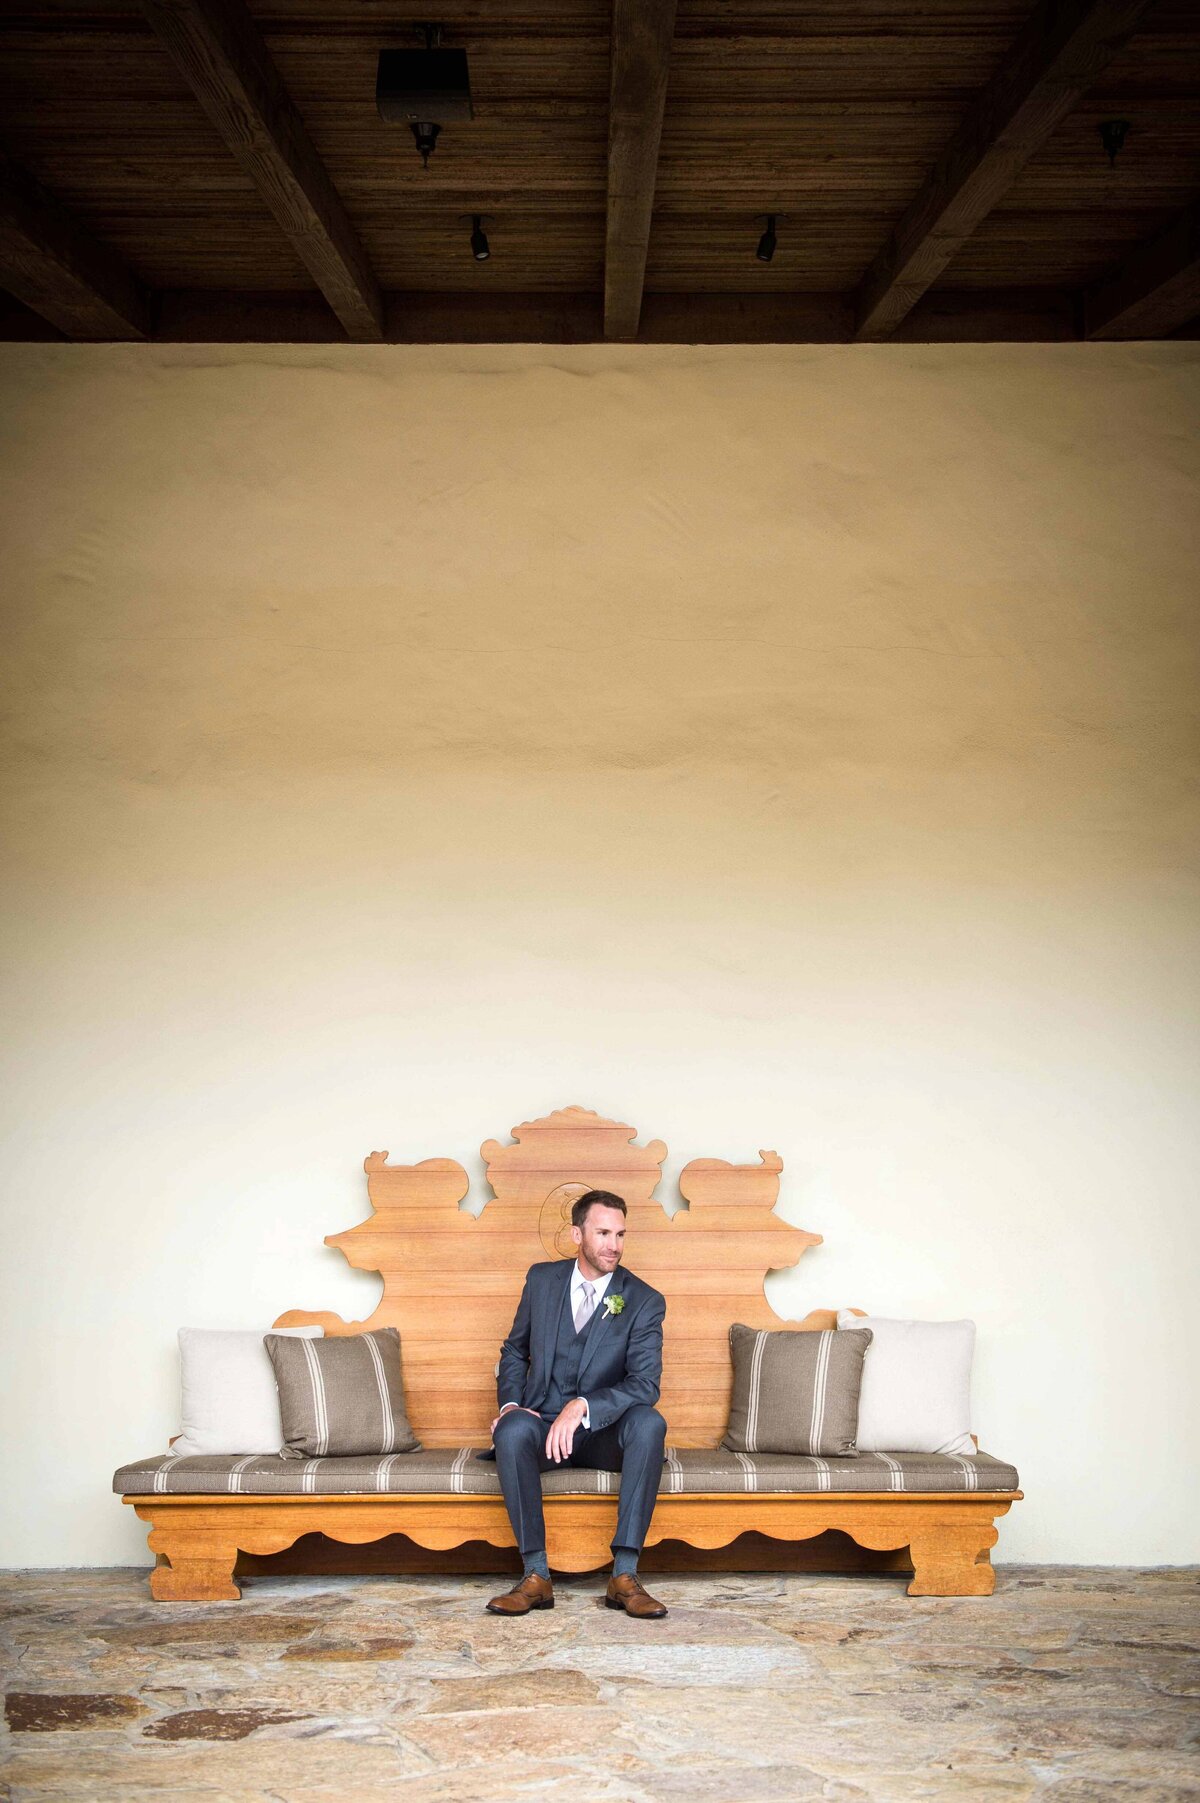 A man wears a formal tailored suit while seated on a wooden bench at the Estancia La Jolla Hotel